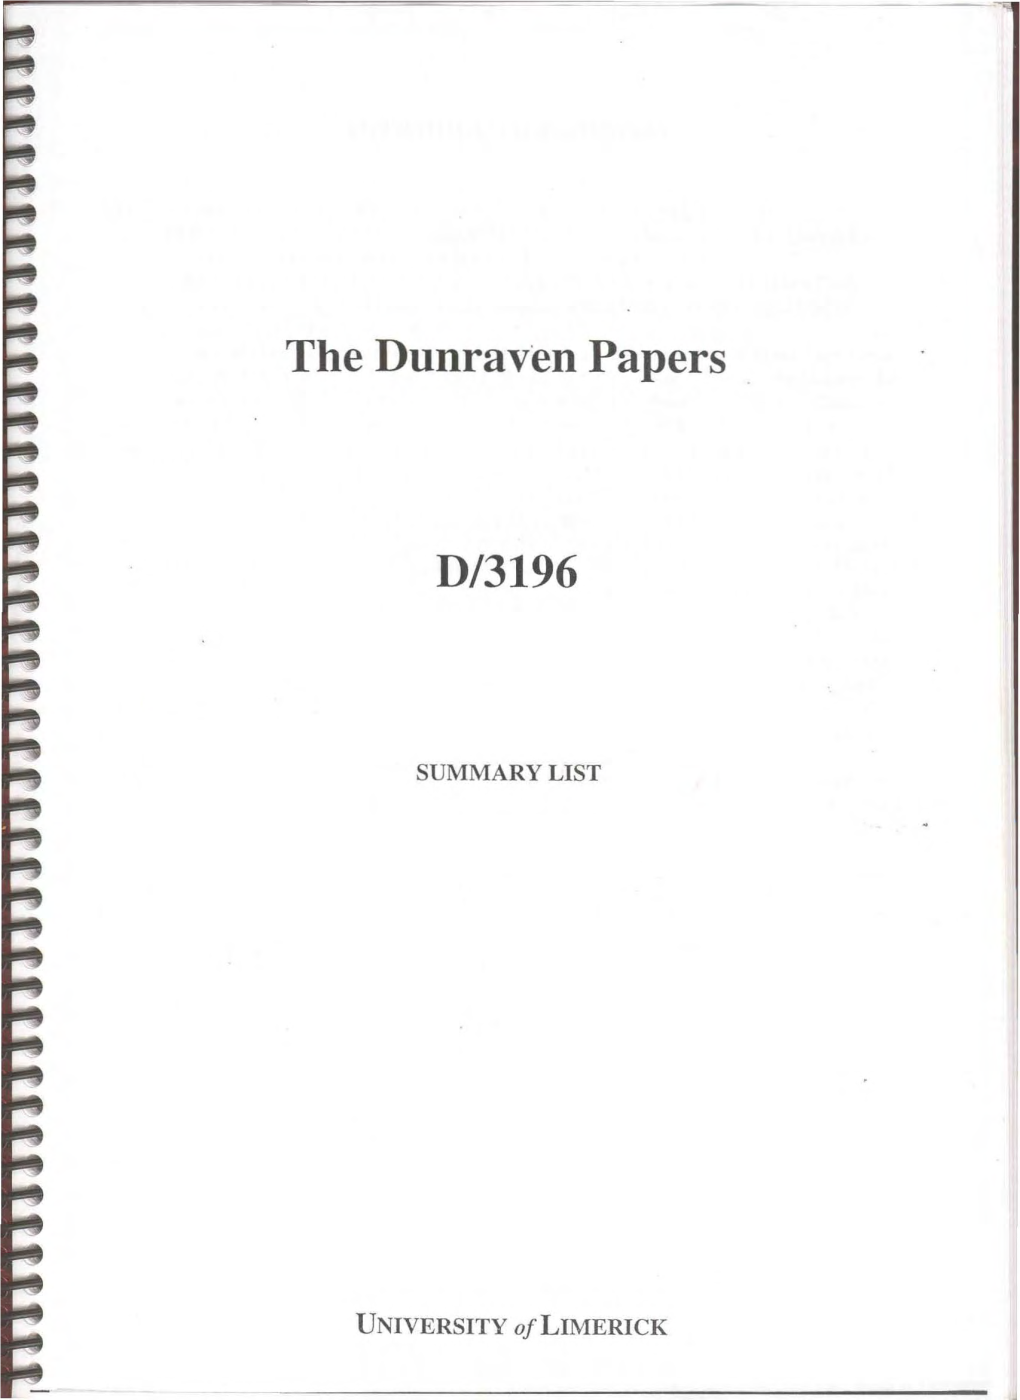 The Dunraven Papers D/3196